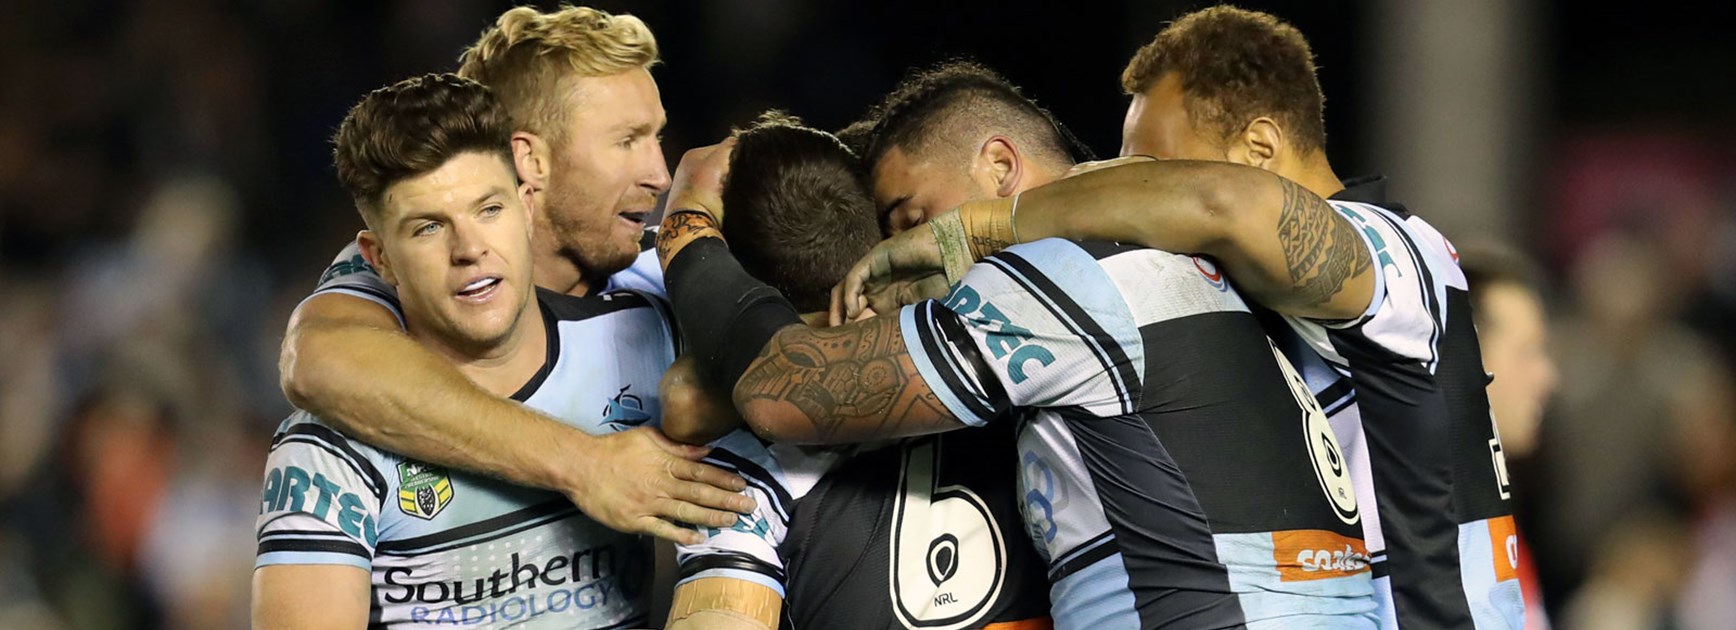 Sharks players celebrate James Maloney's winning field goal against the Warriors.